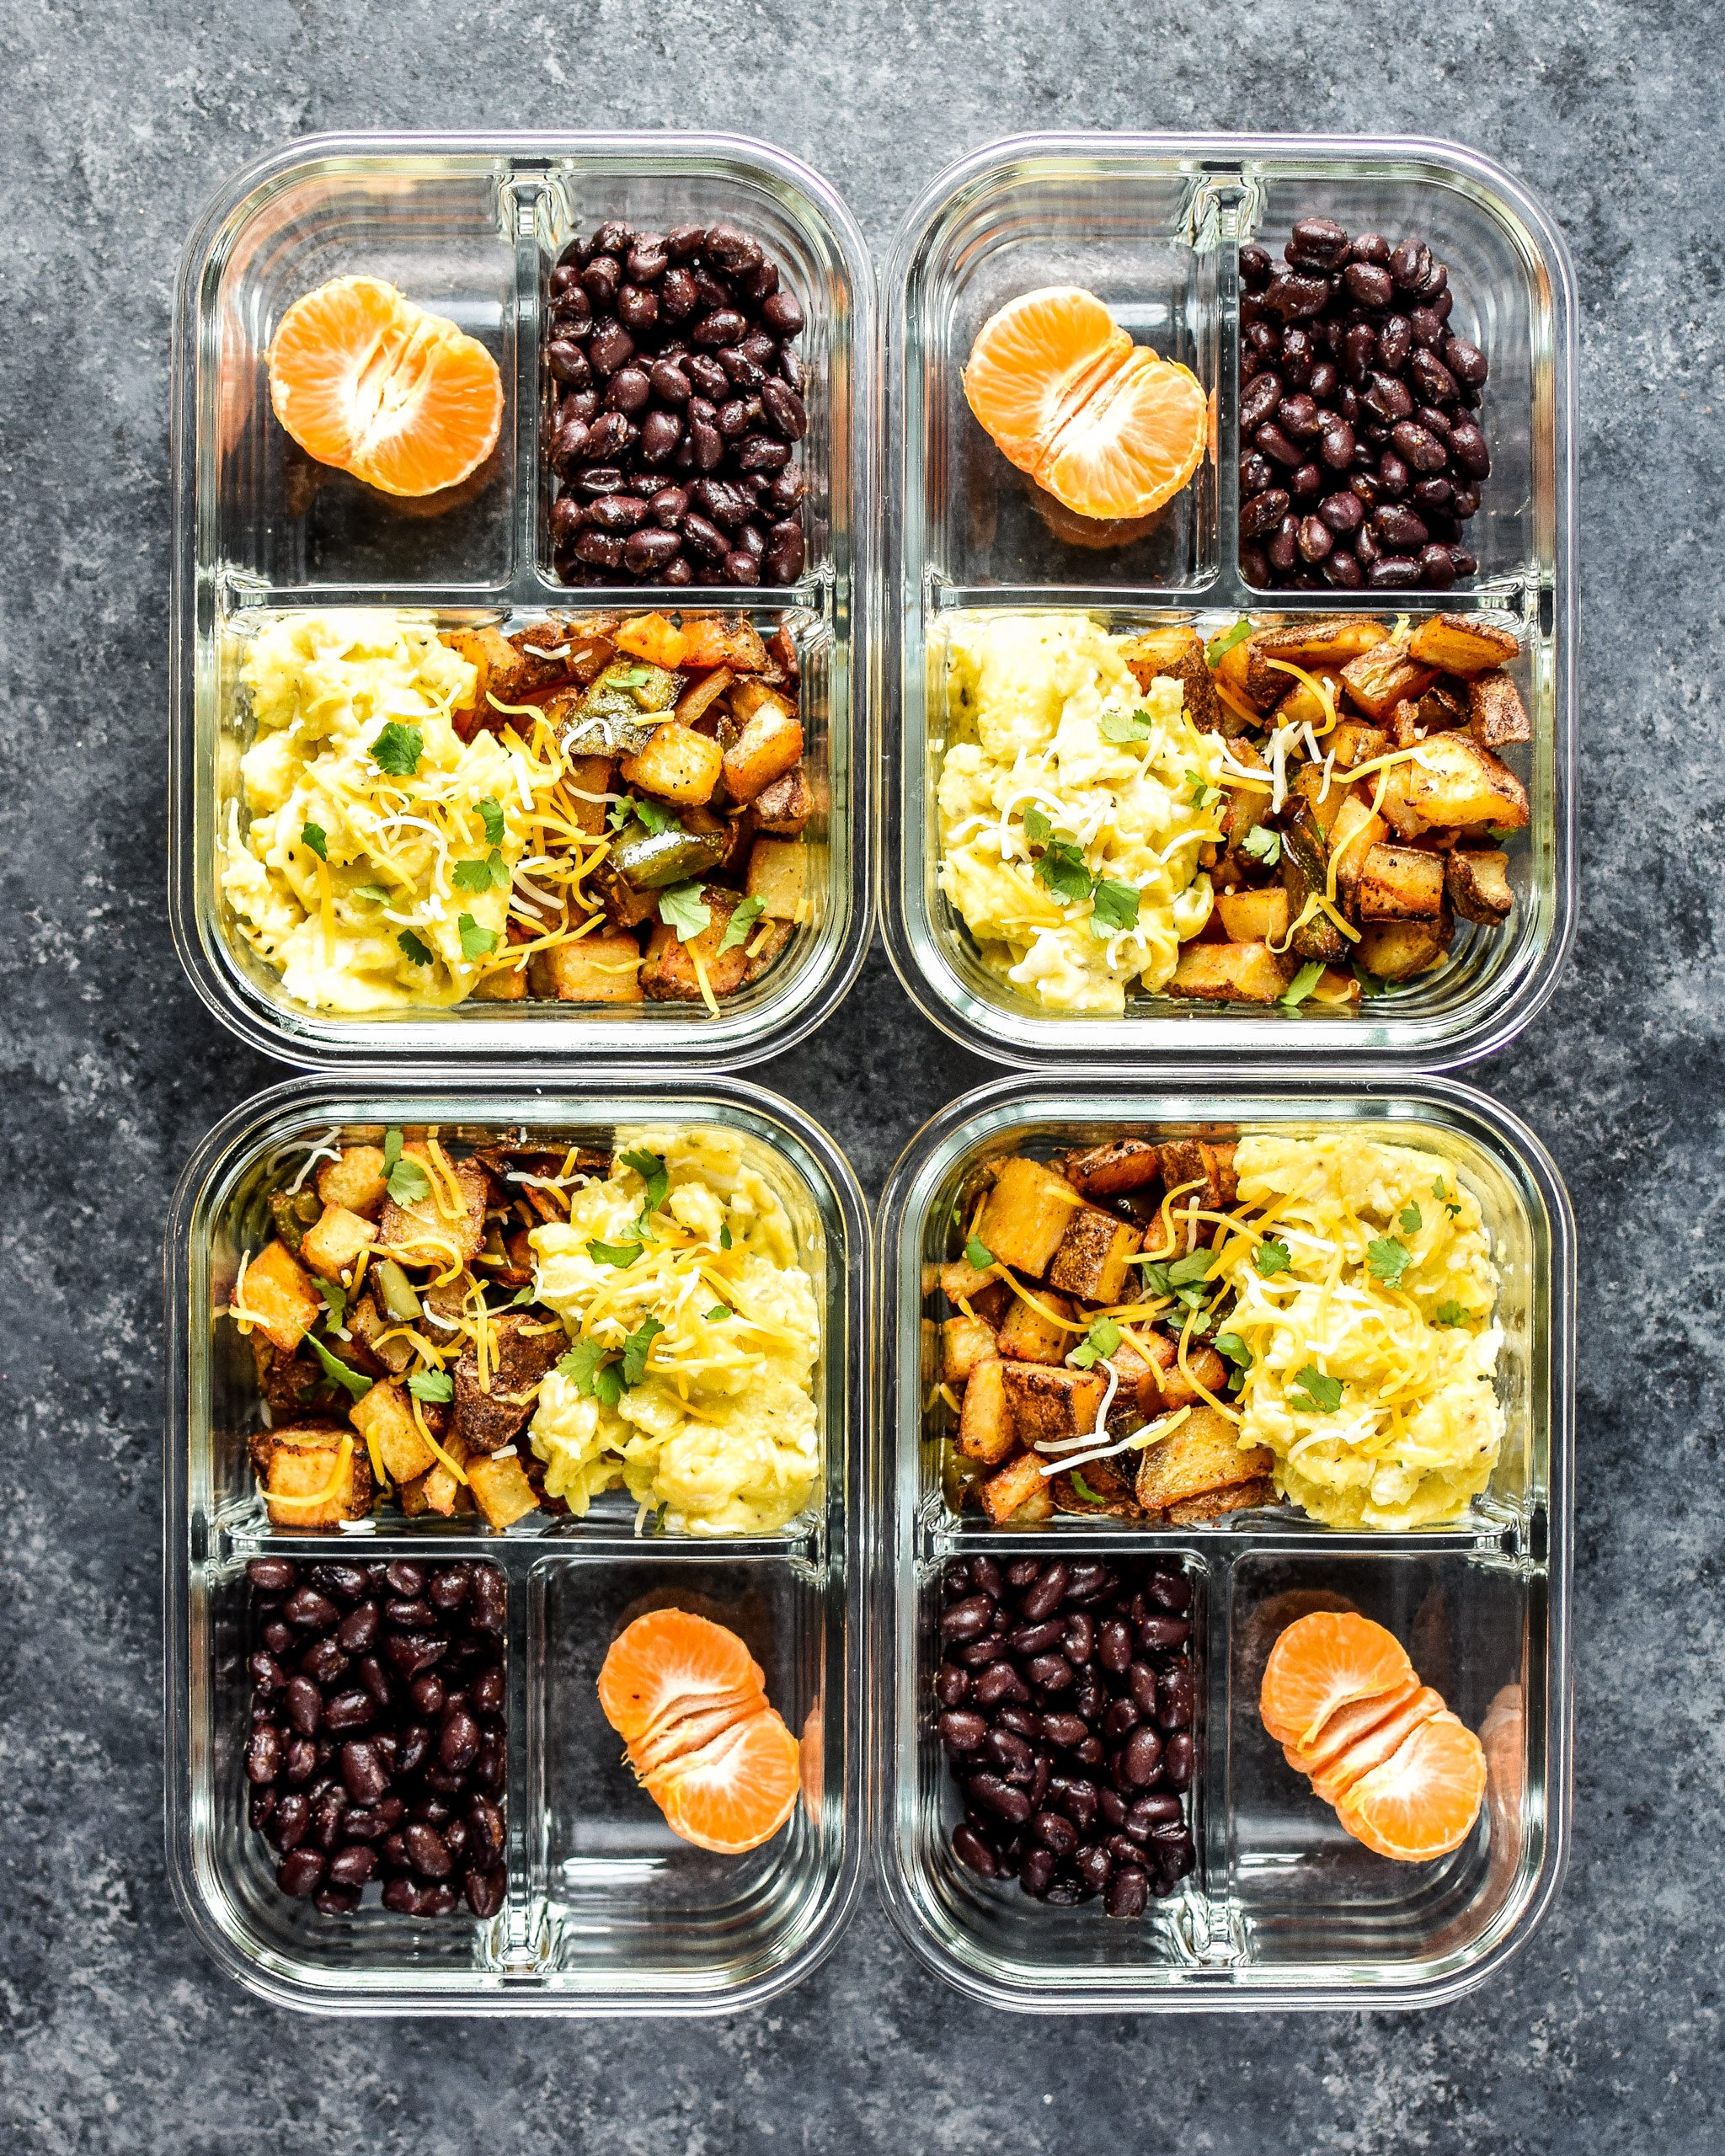 Four meal prep containers with potatoes, eggs, black beans and half a mandarin.